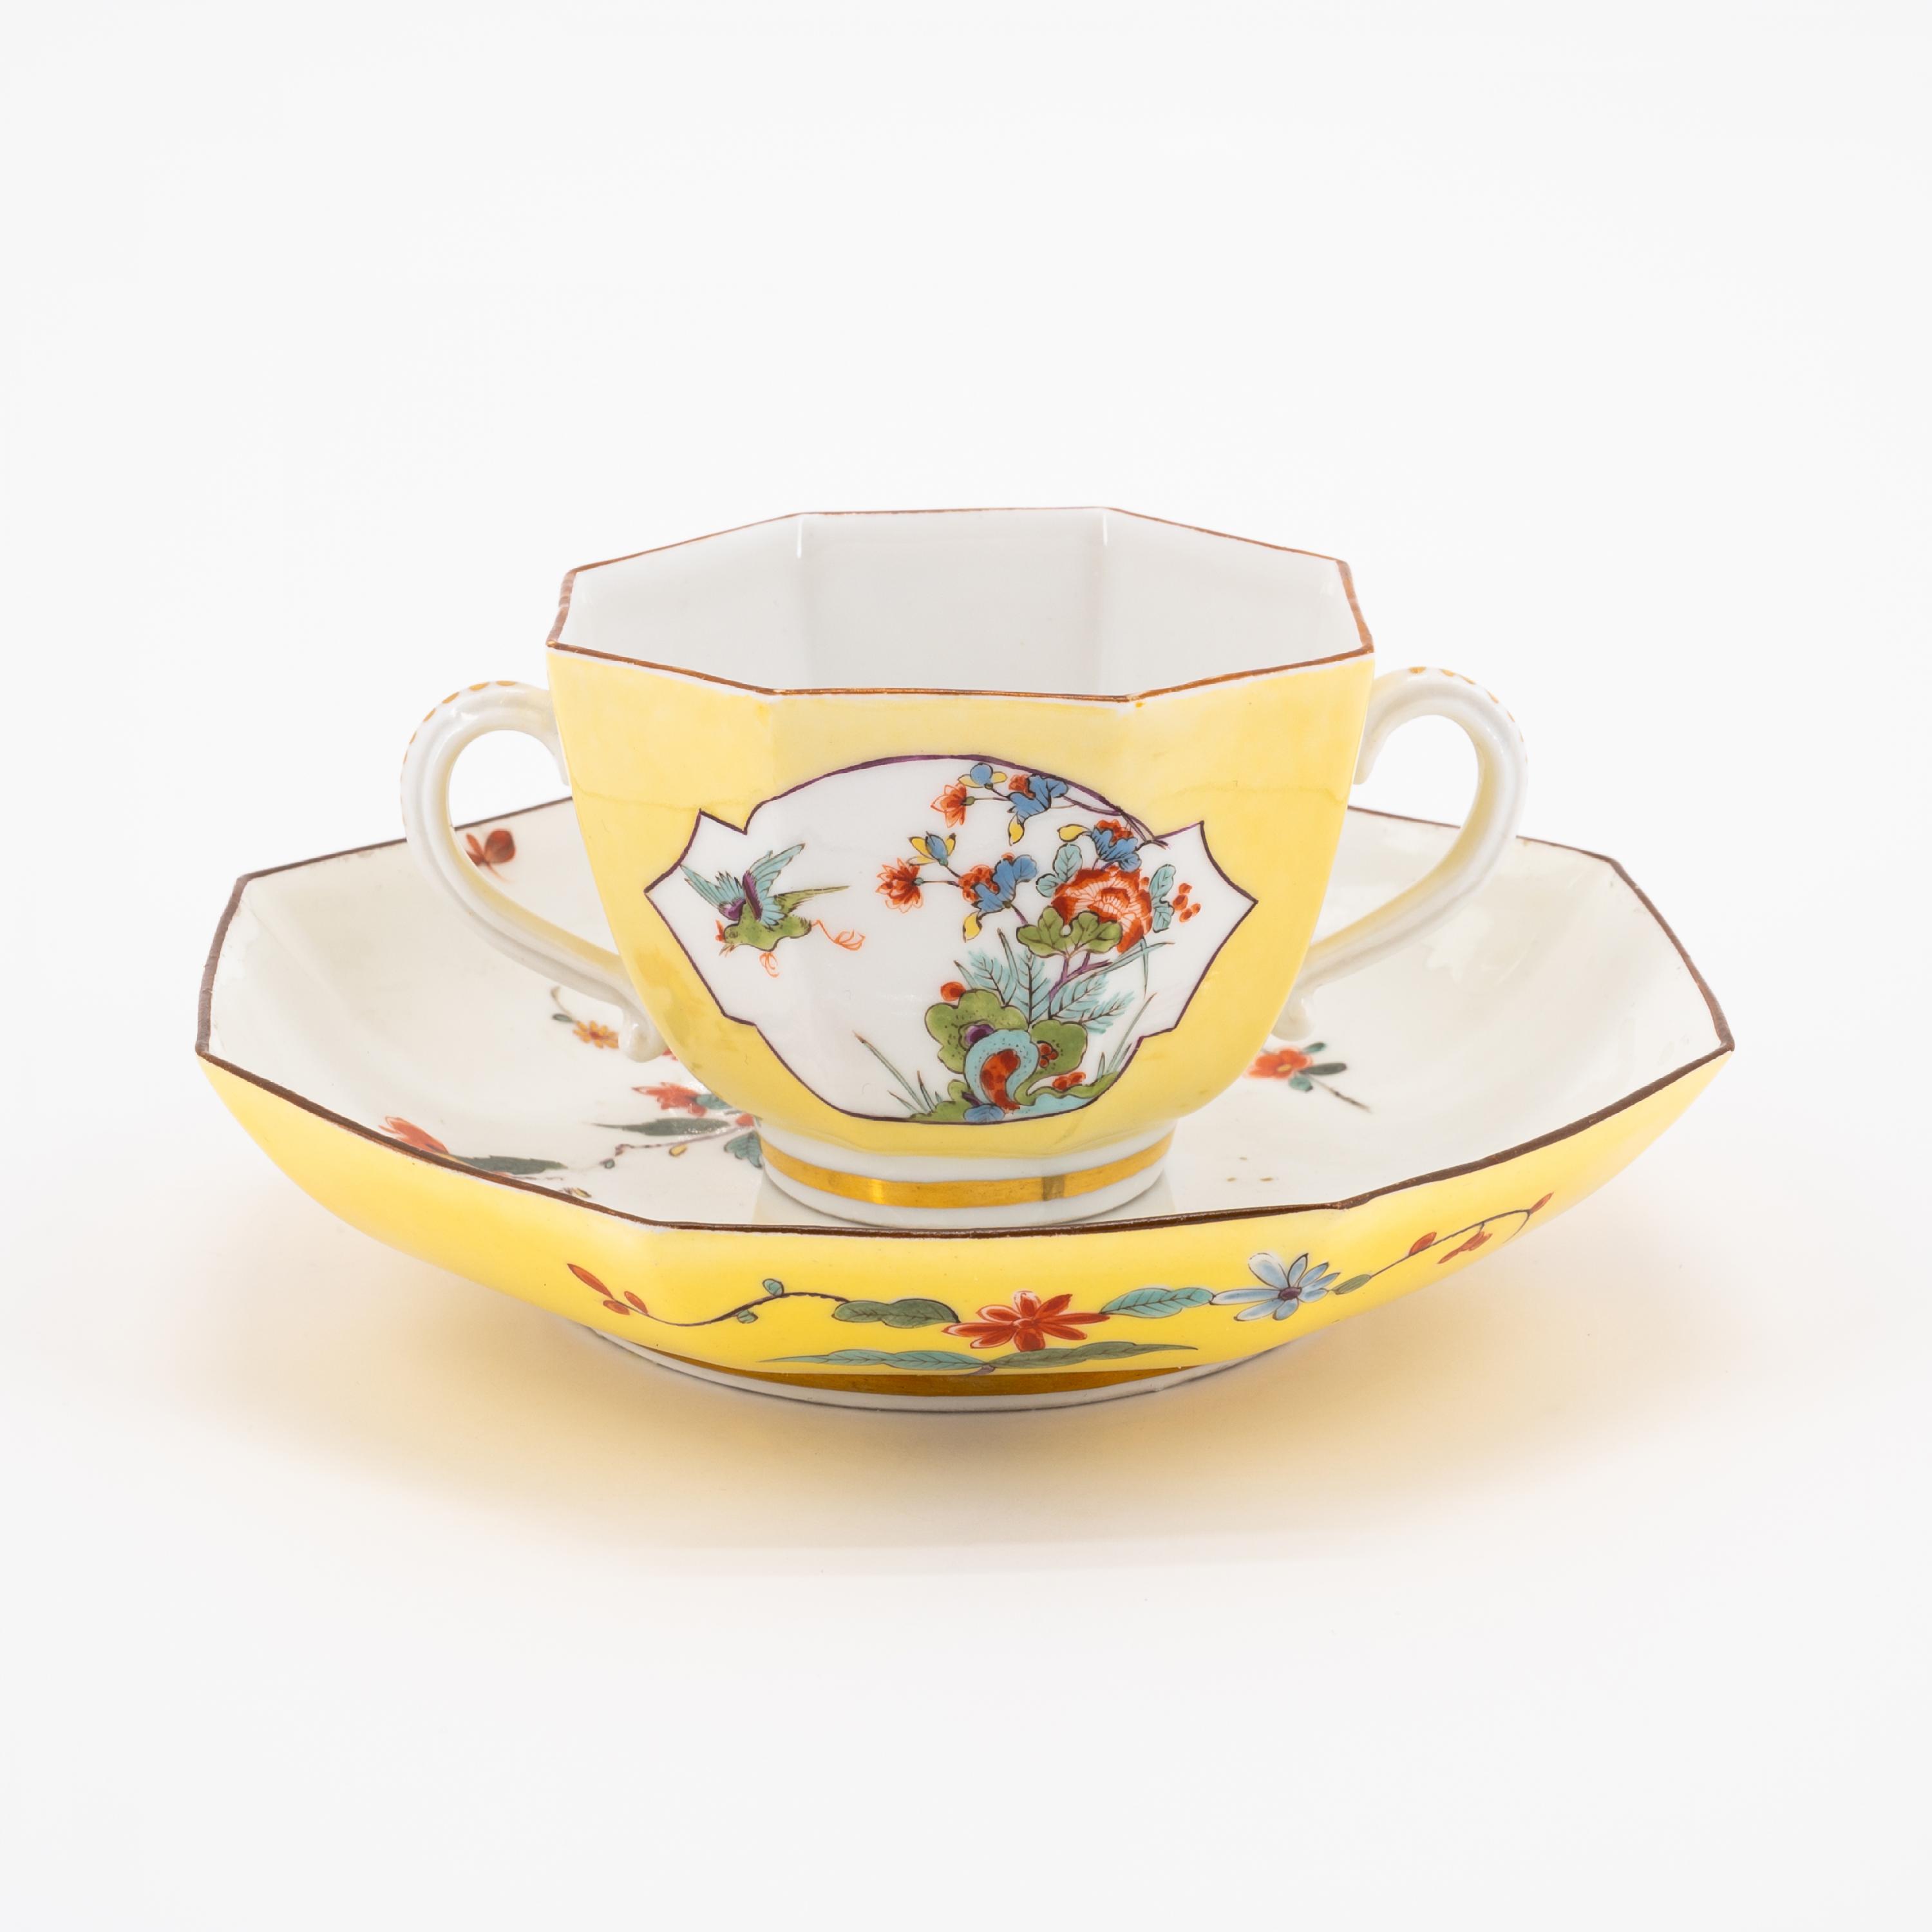 TWO PORCELAIN CUP WITH DOUBLE HANDLES & SAUCERS WITH KAKIEMON DECOR AND YELLOW GROUND - Image 3 of 11